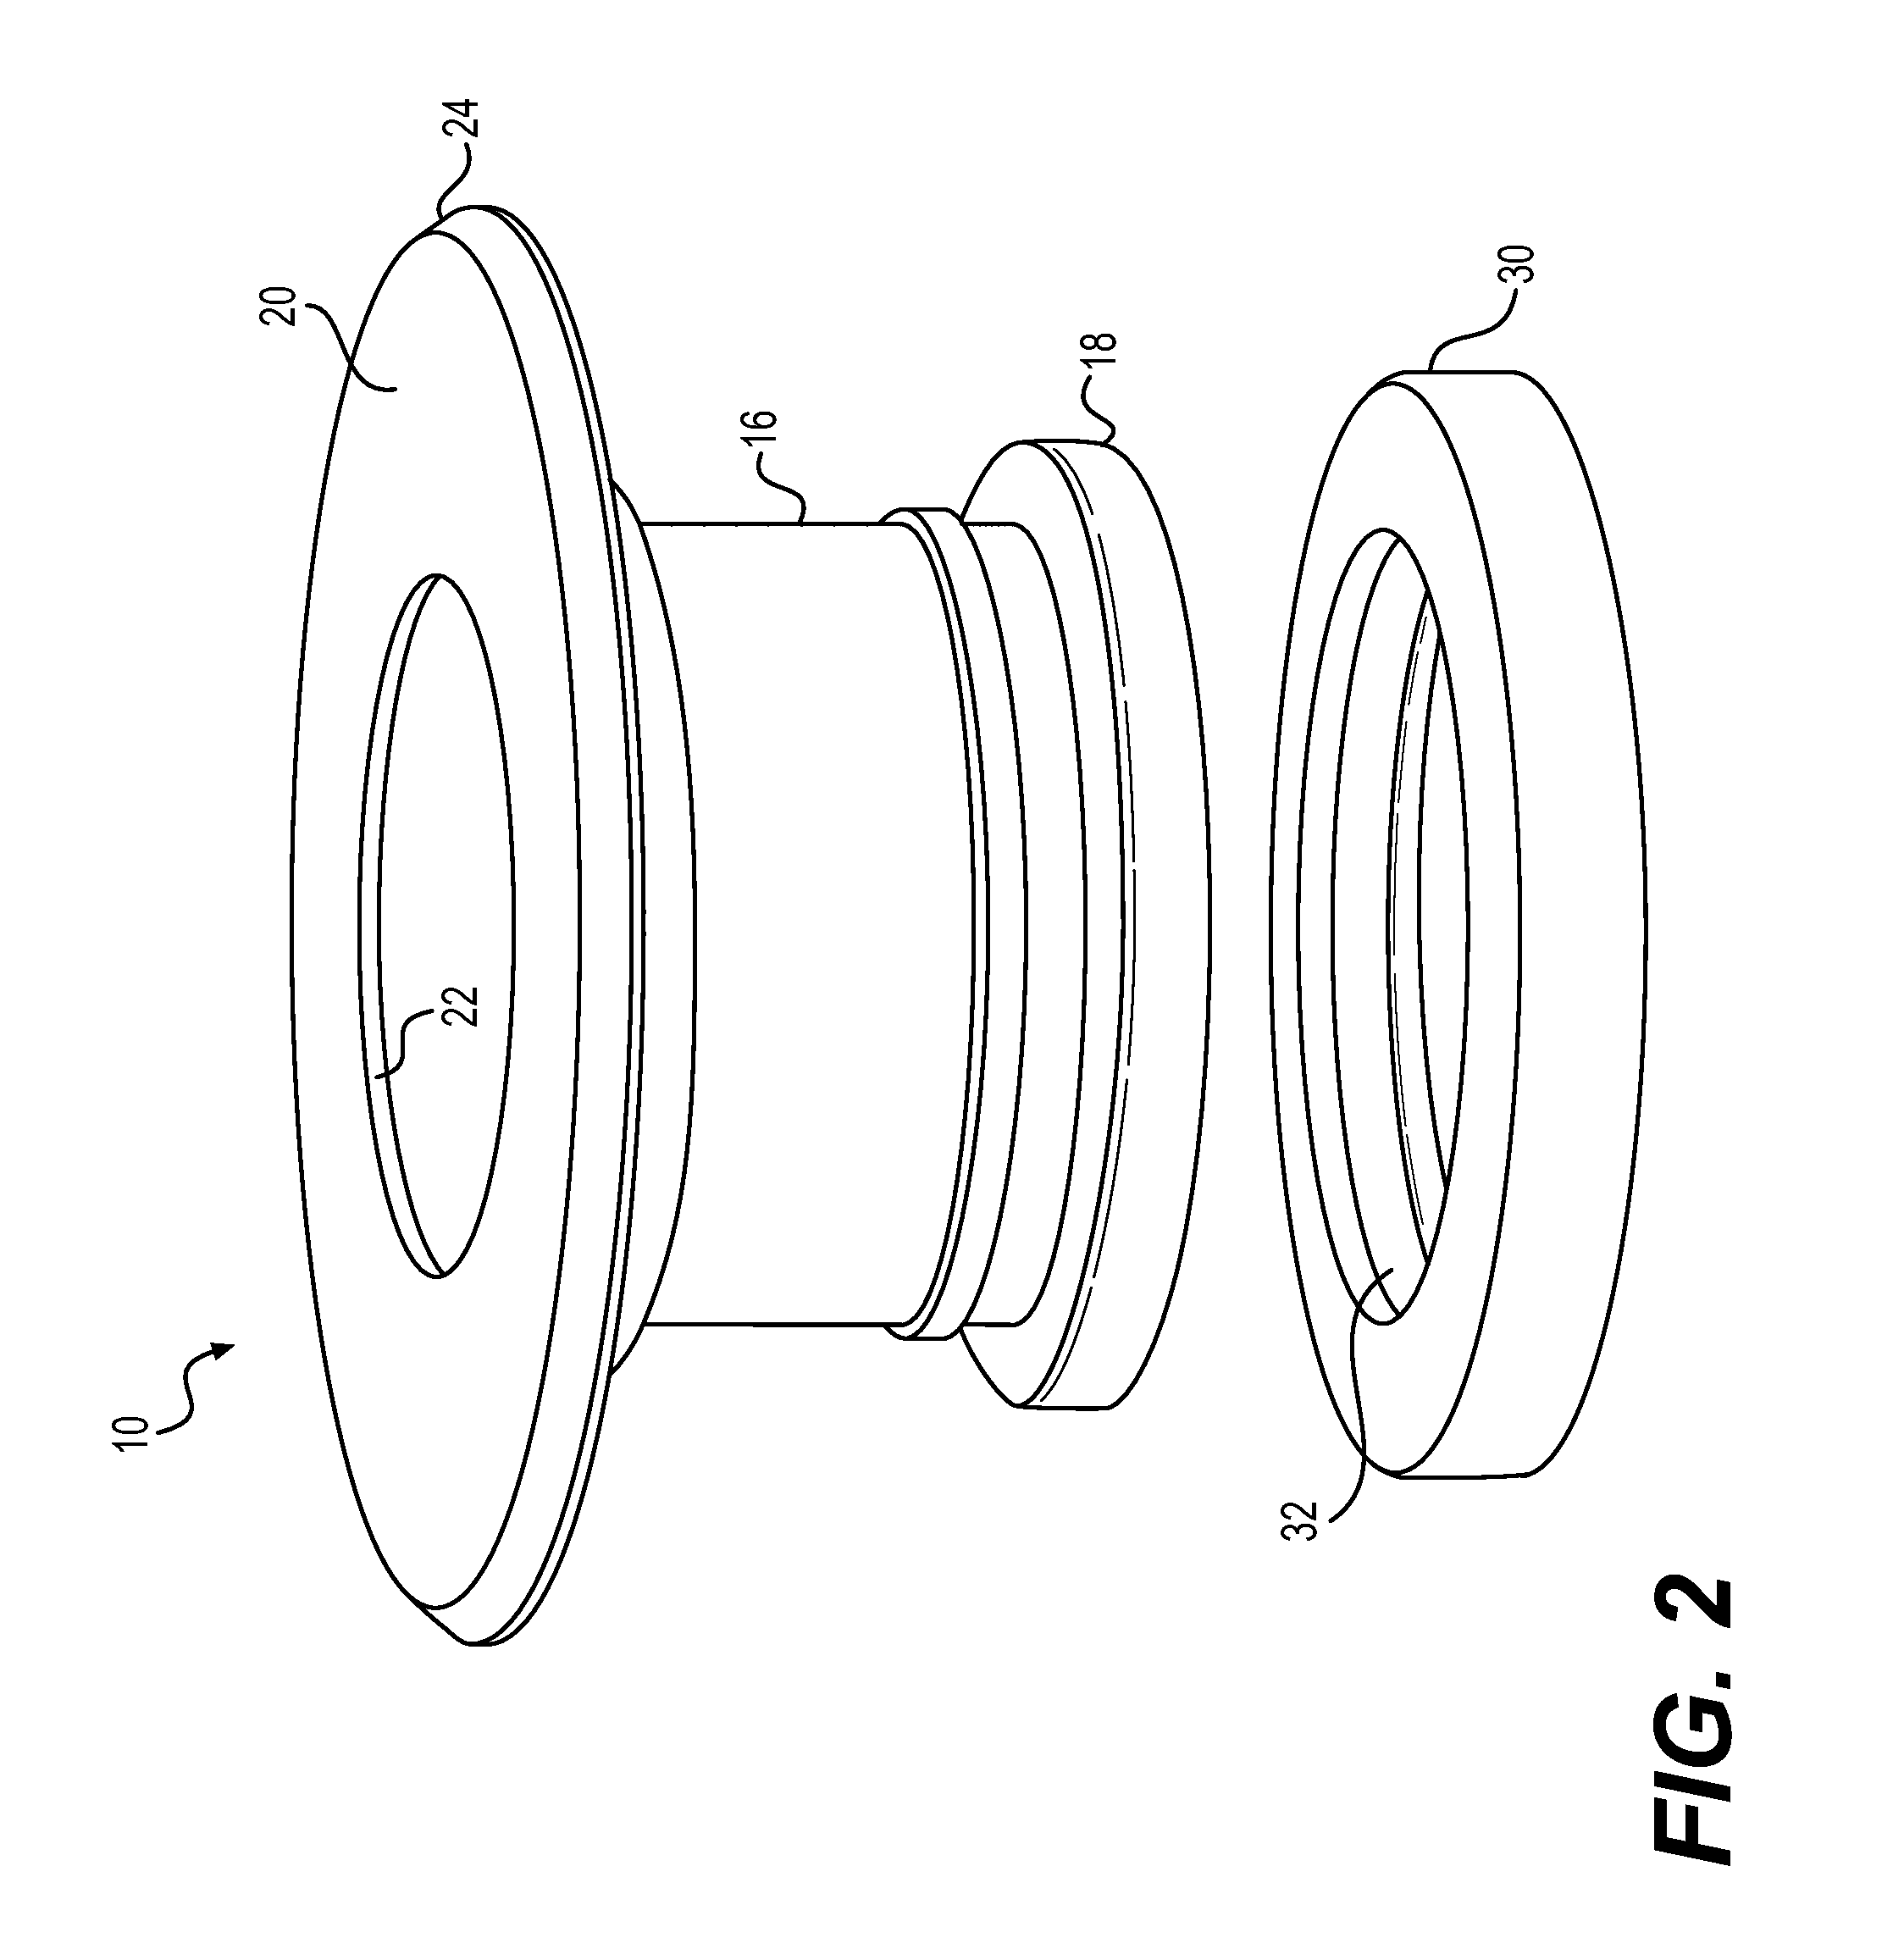 Flexible Toilet Seal Adaptable to Conduits of Different Size and Related Method